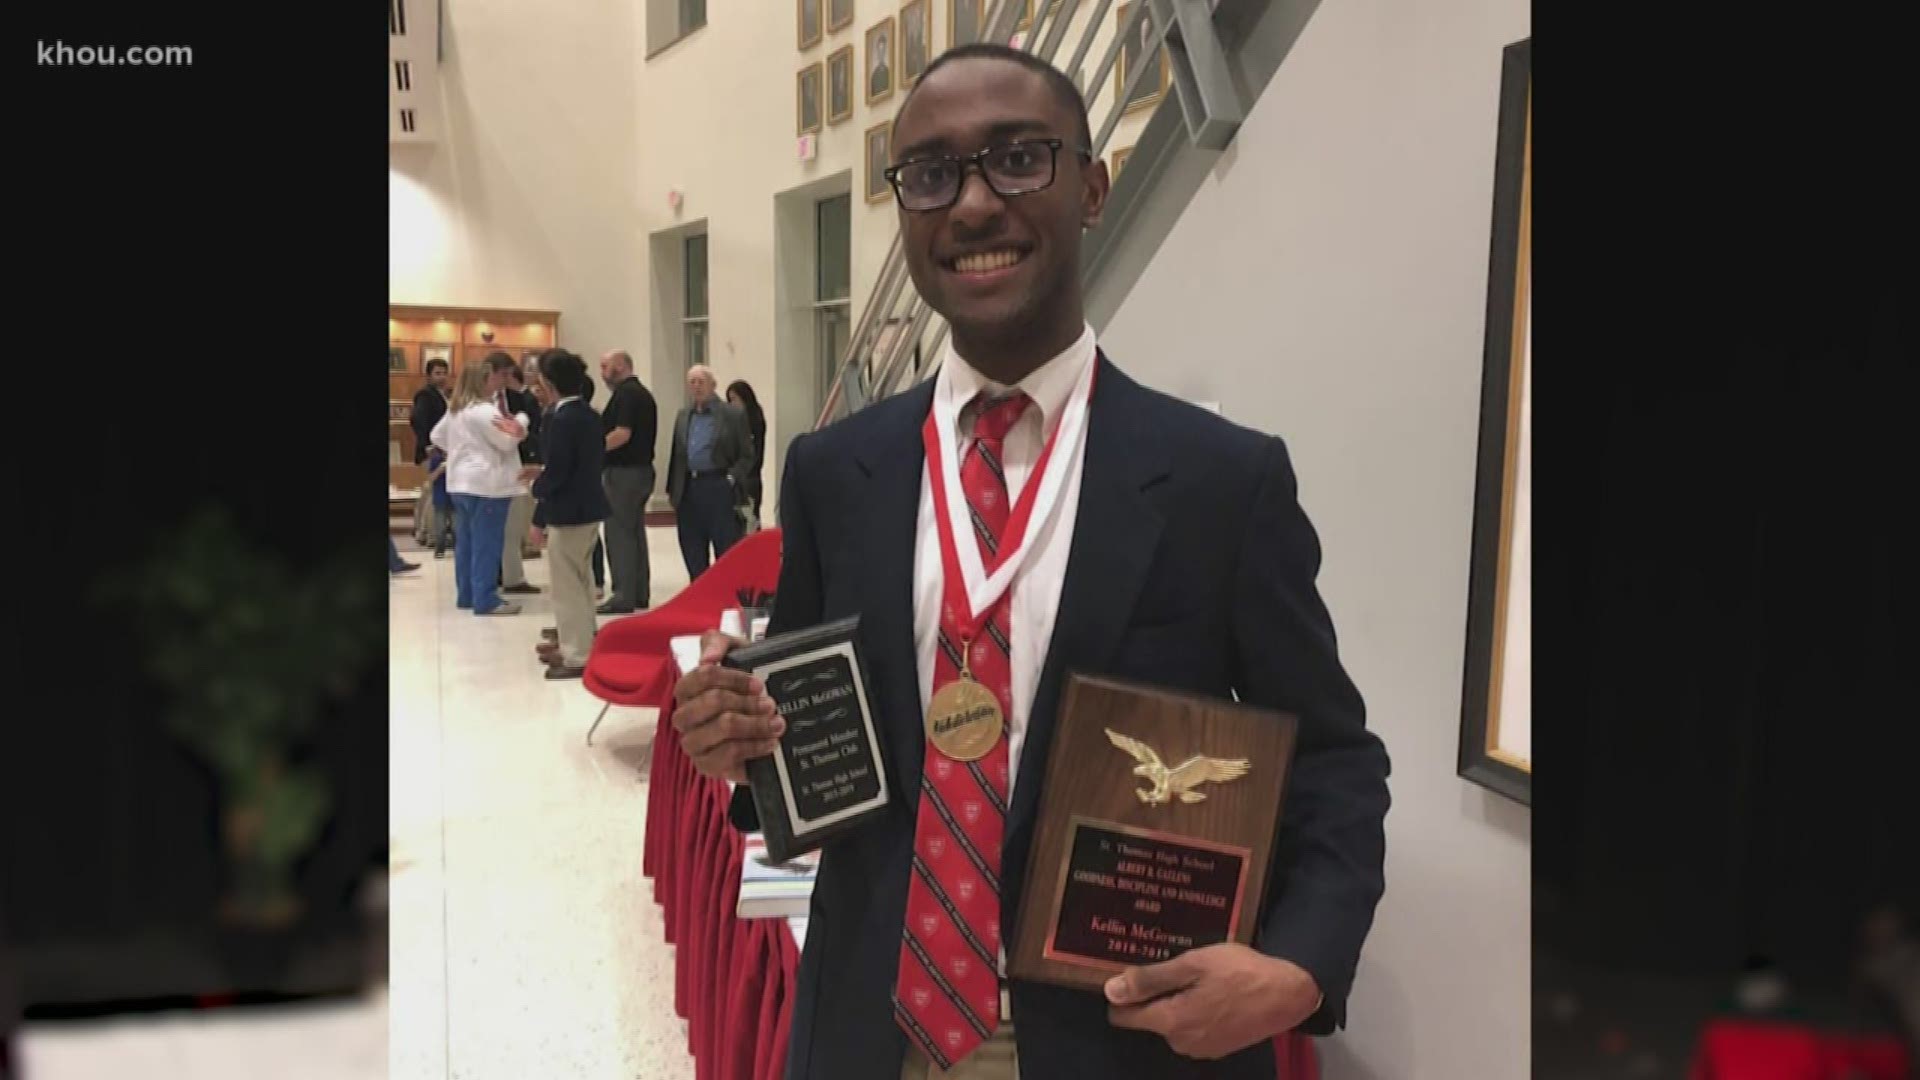 Kellin McGowan is the first black valedictorian at one of Houston's oldest private schools. It's a first for the 119-year old school.